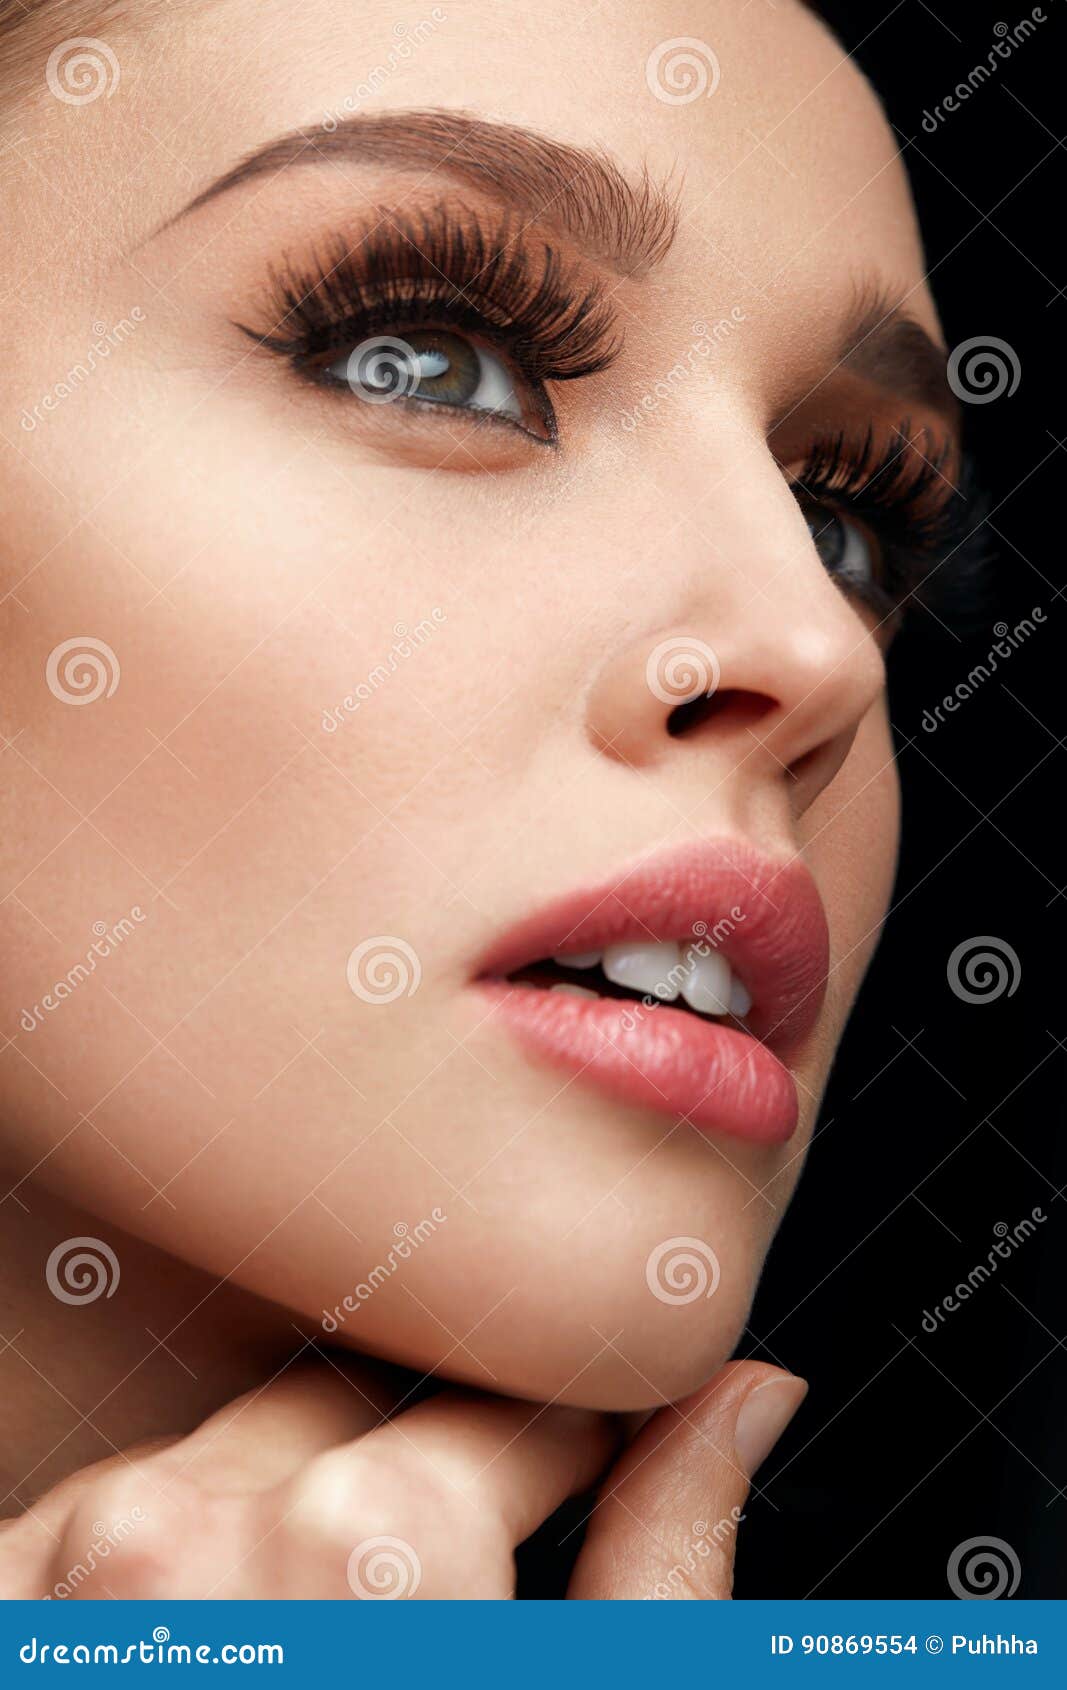 Beauty Face Woman With Makeup Soft Skin And Long Eyelashes Stock